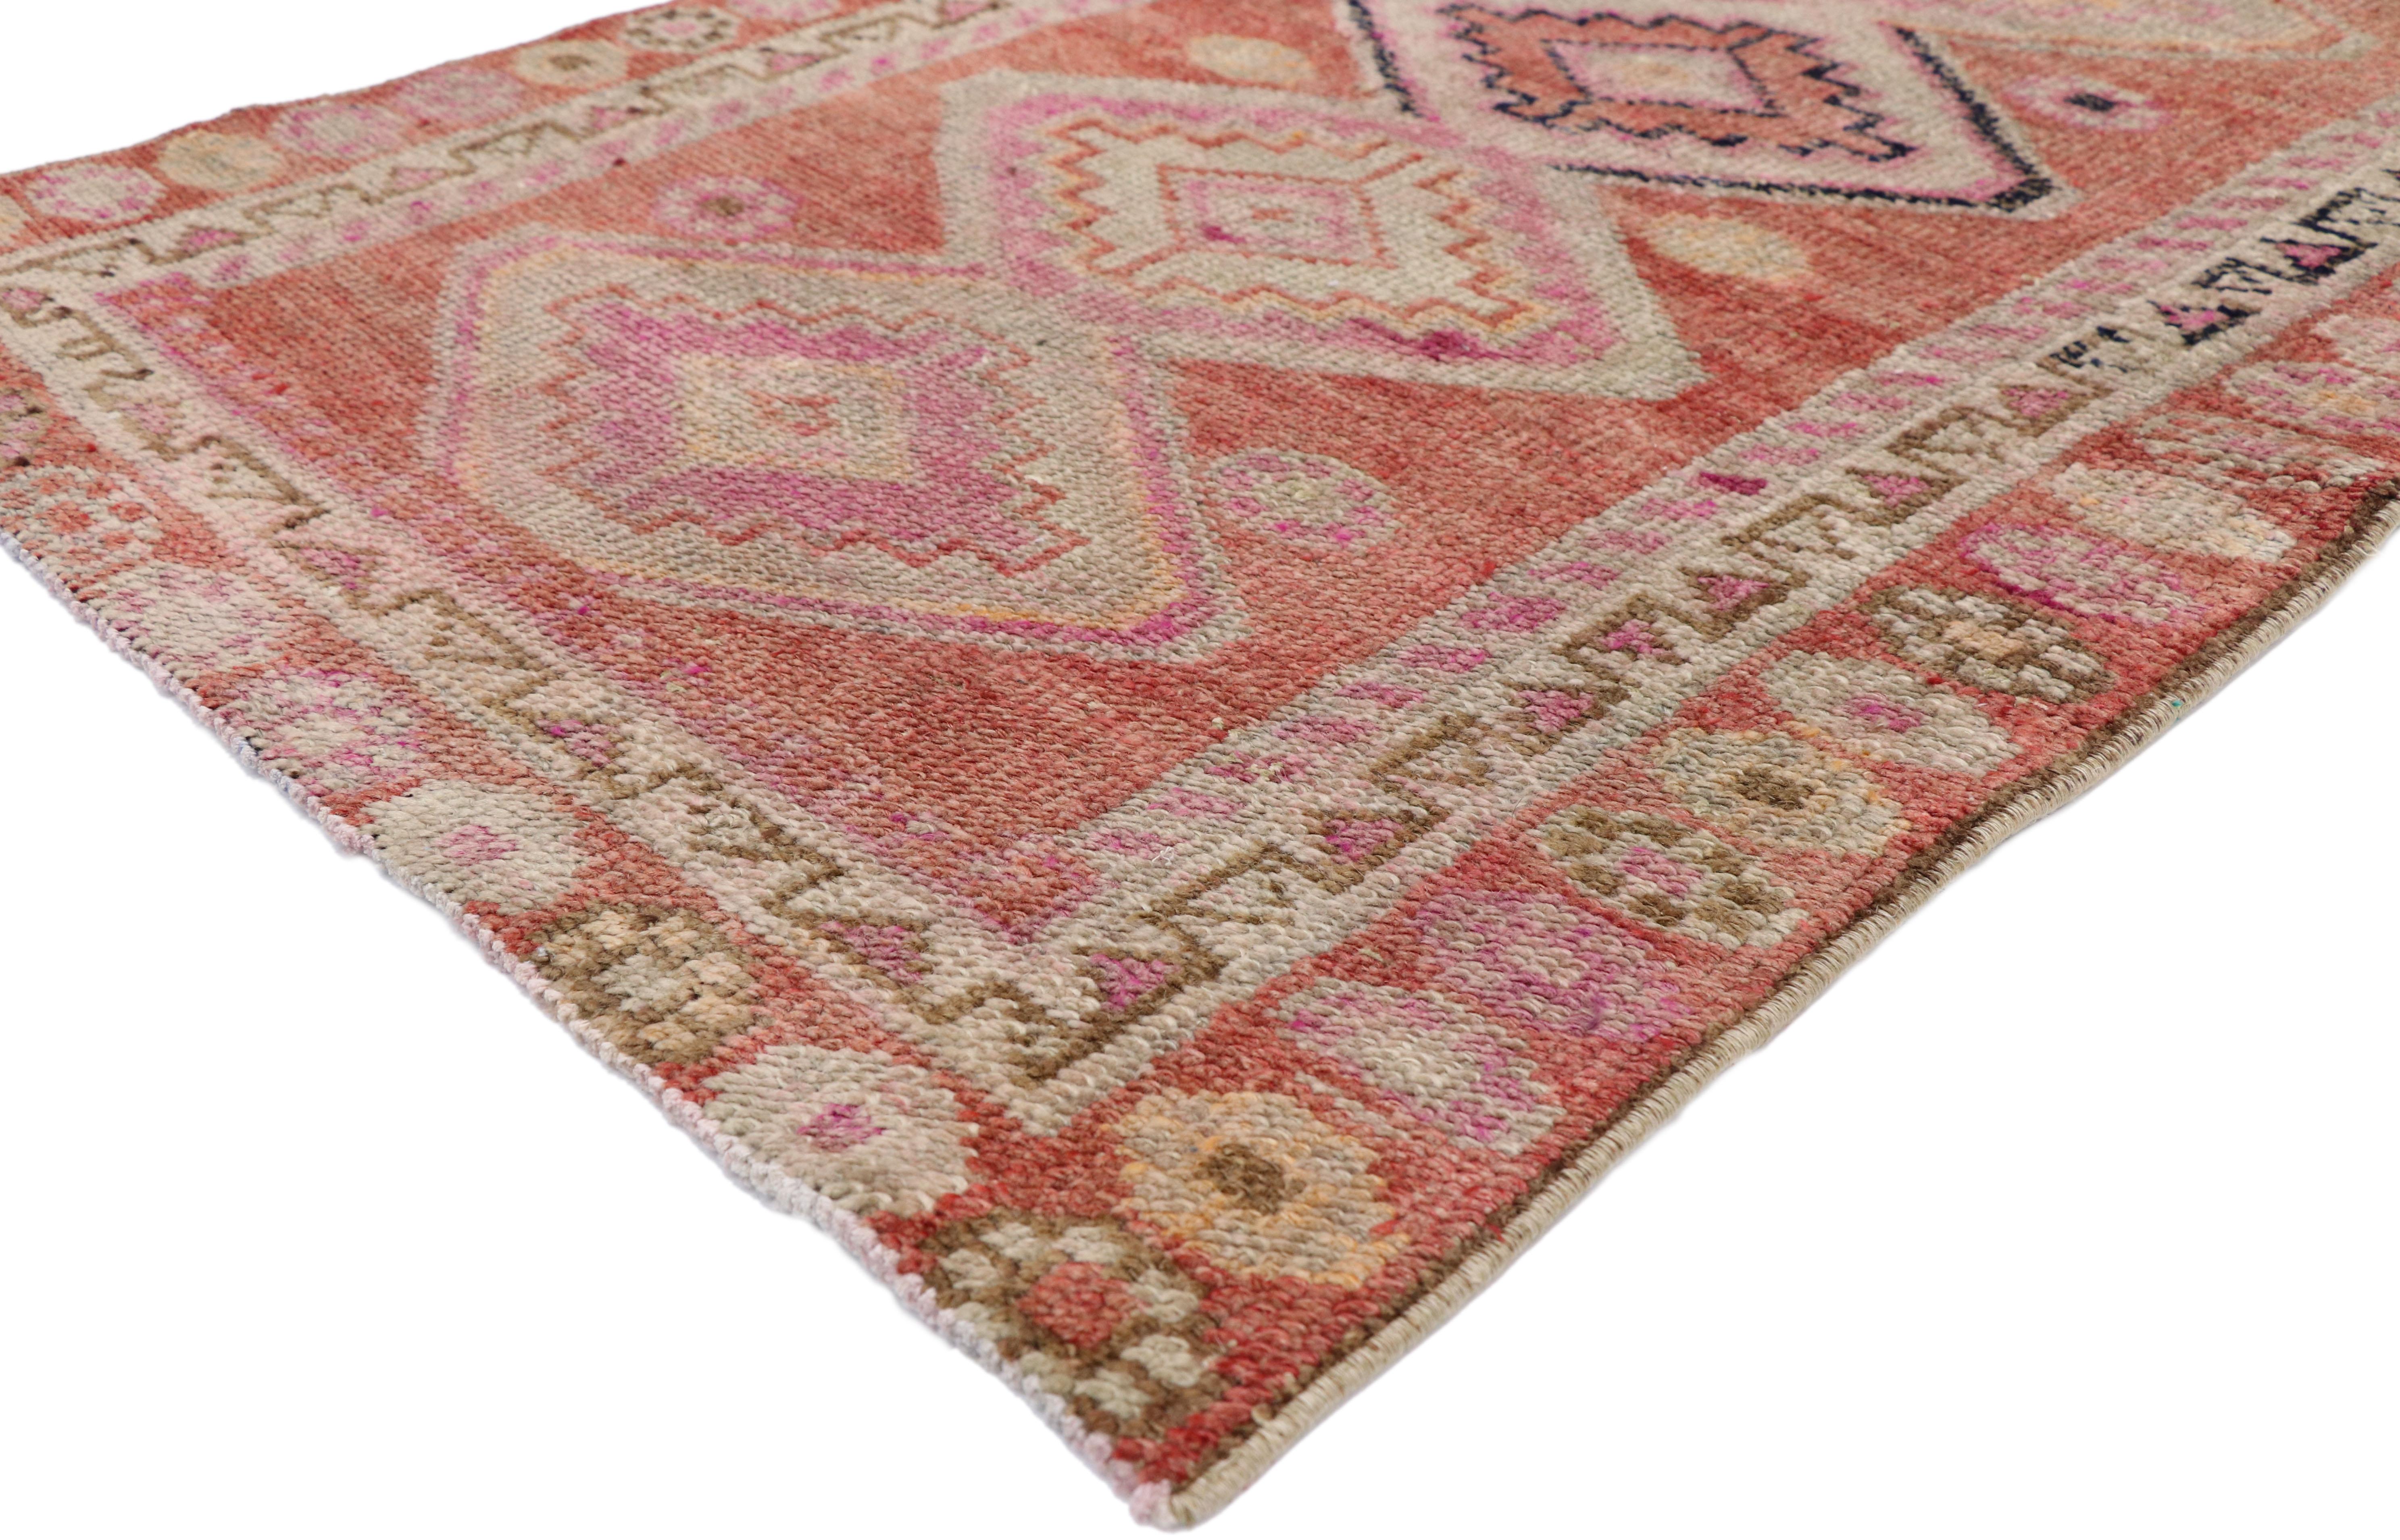 52665 Vintage Turkish Oushak Rug Runner, 03'00 x 12'00. Turkish Oushak carpet runners are narrow, hand-knotted rugs originating from the Oushak region of Turkey, characterized by intricate designs, serene color palettes, and luxurious wool